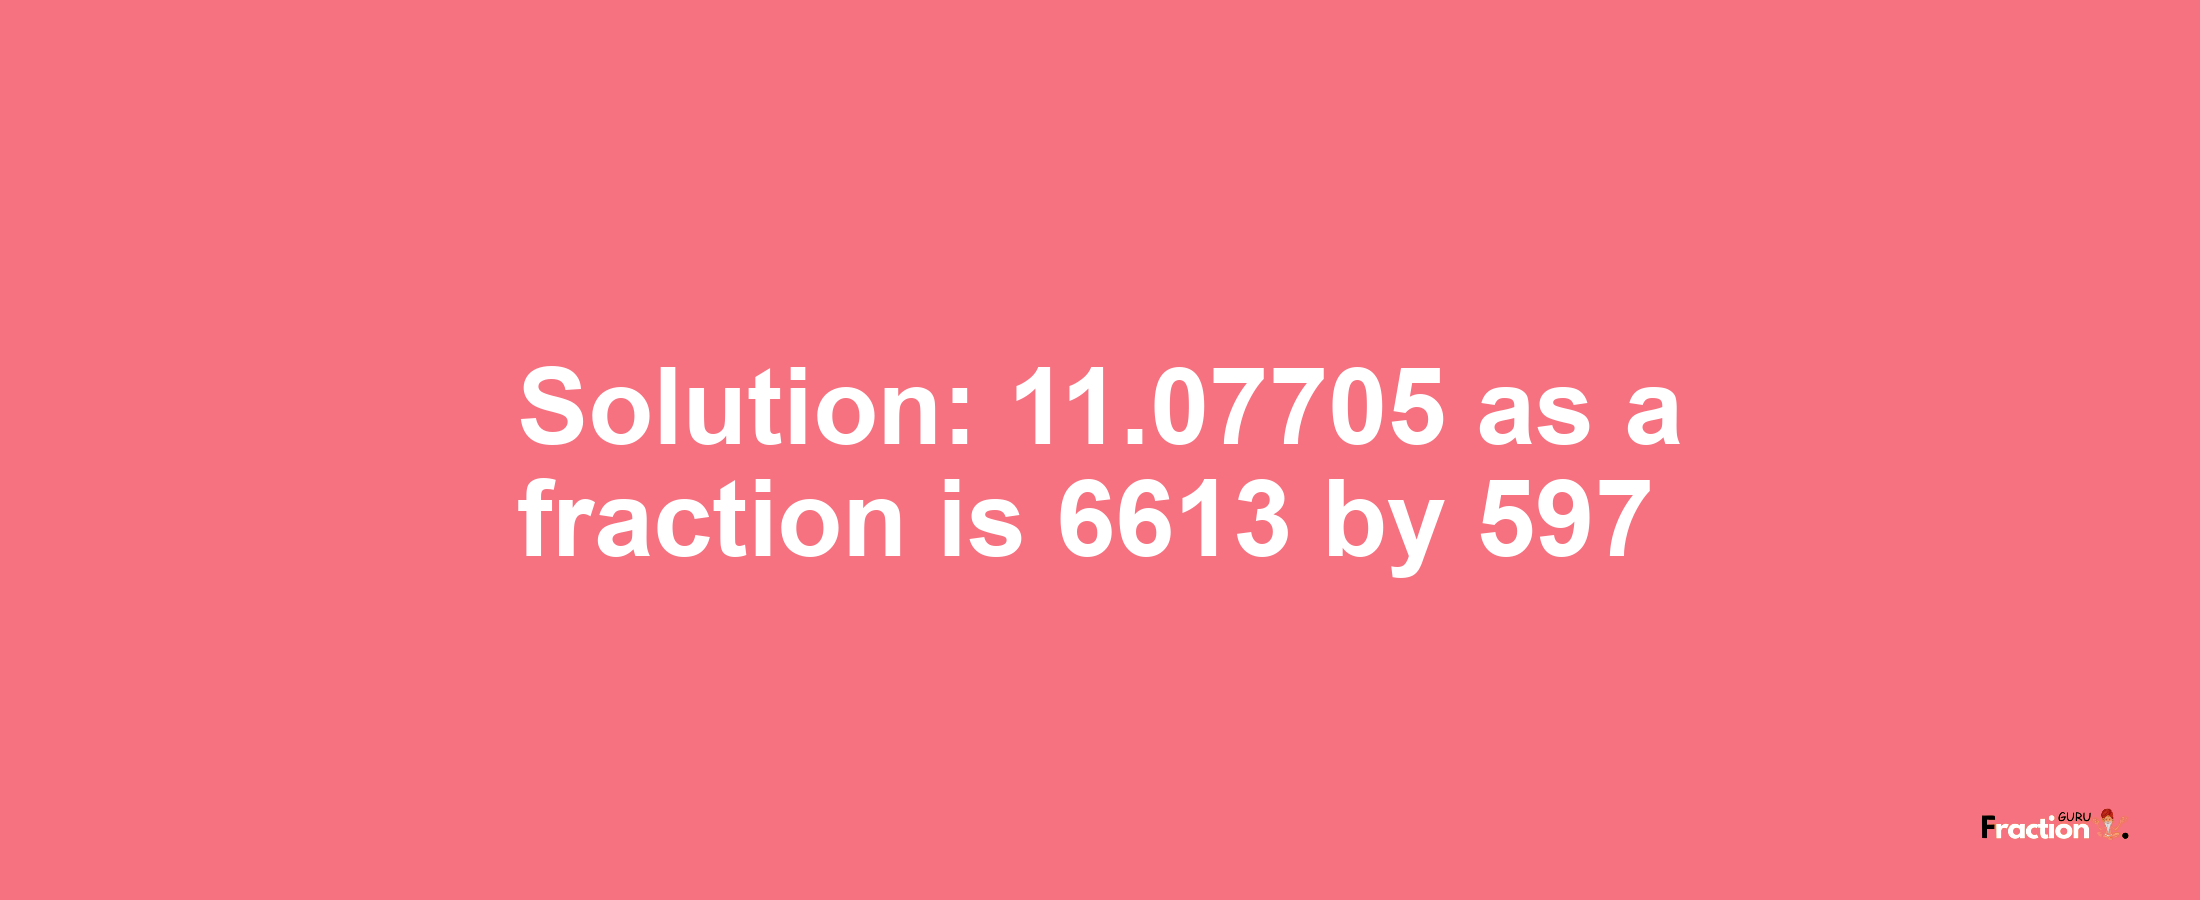 Solution:11.07705 as a fraction is 6613/597